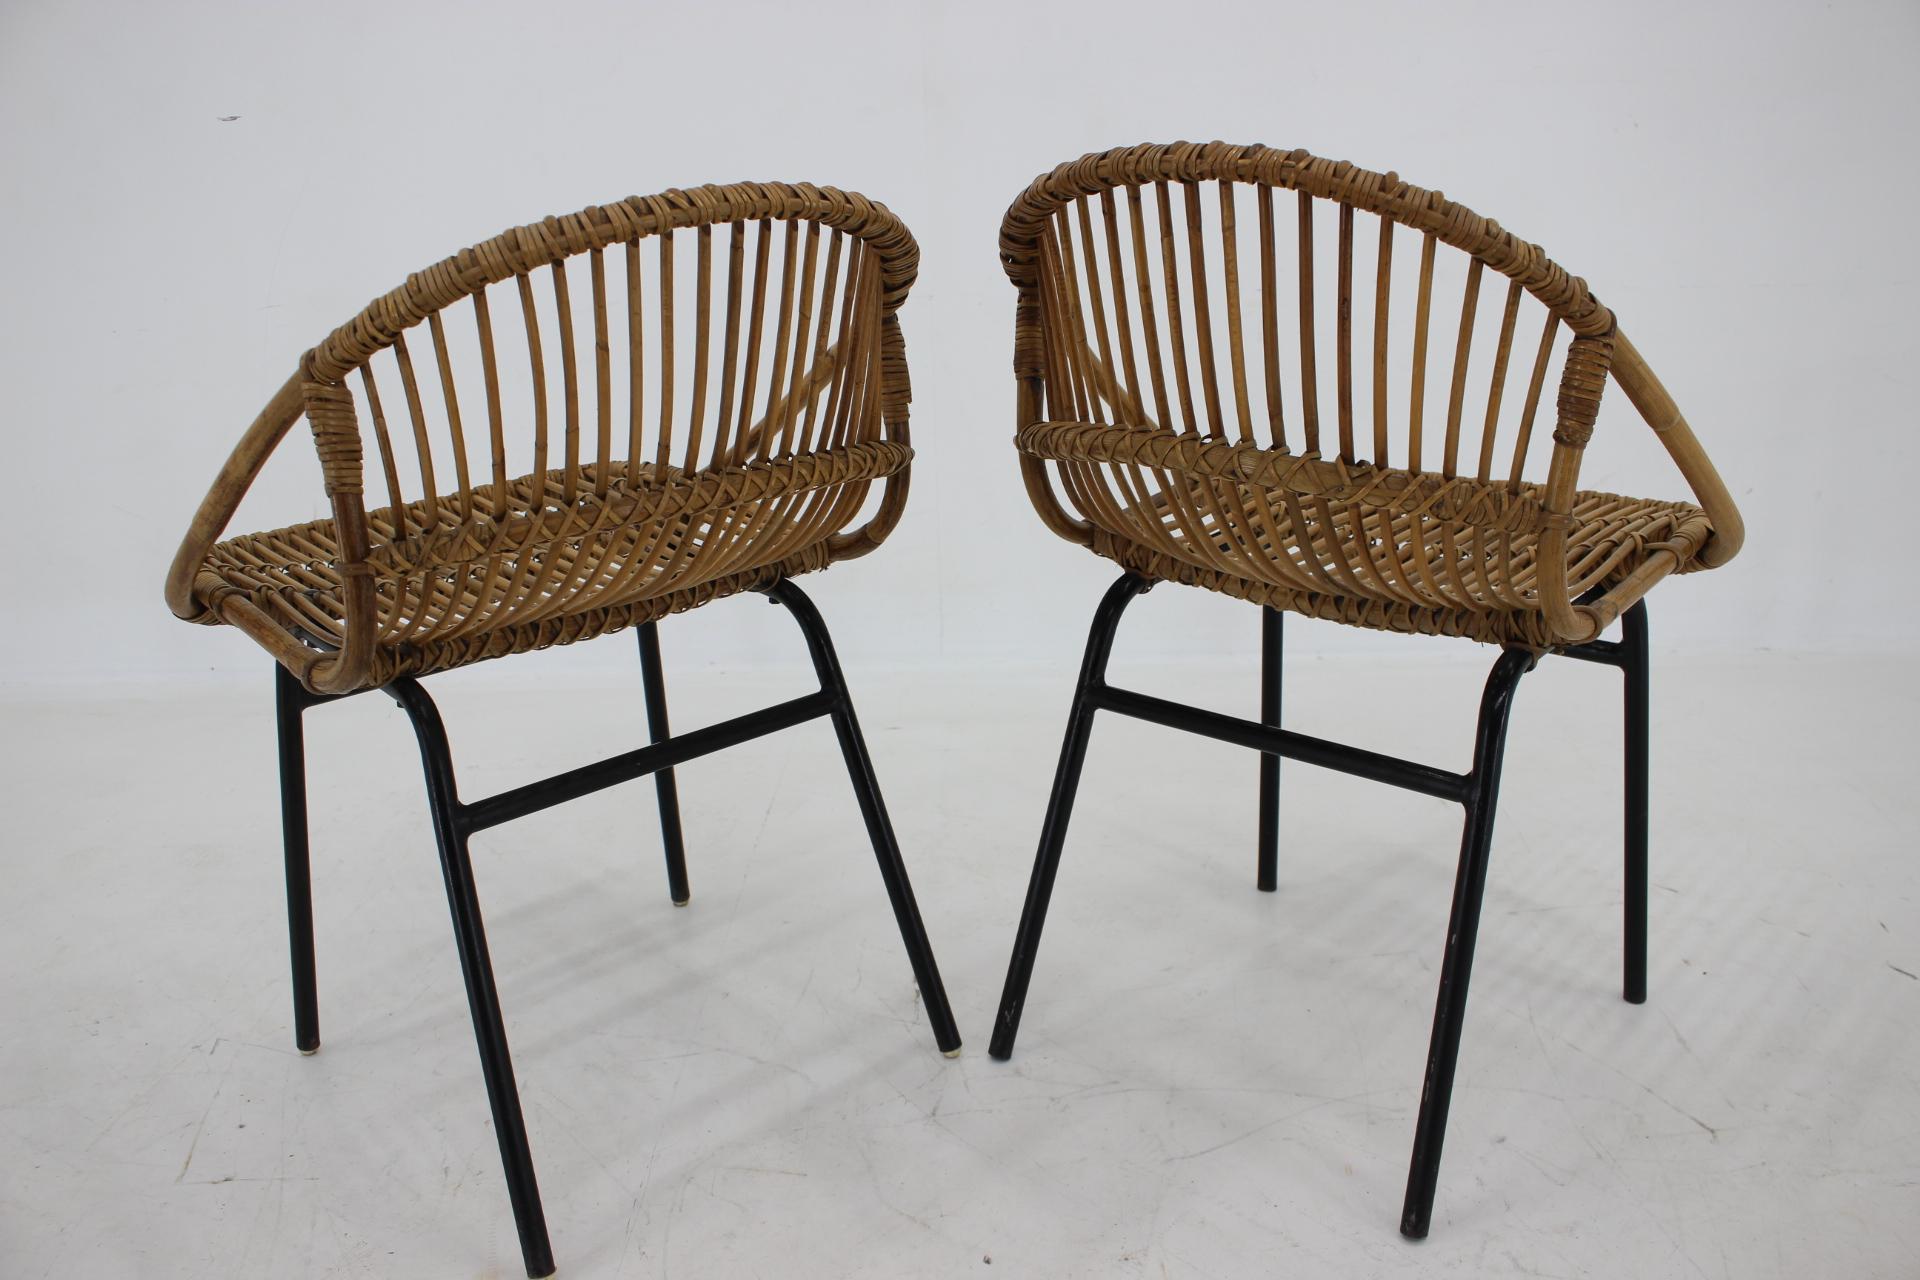 1970s Pair of Alan Fuchs Rattan and Iron Lounge Chairs, Czechoslovakia For Sale 1